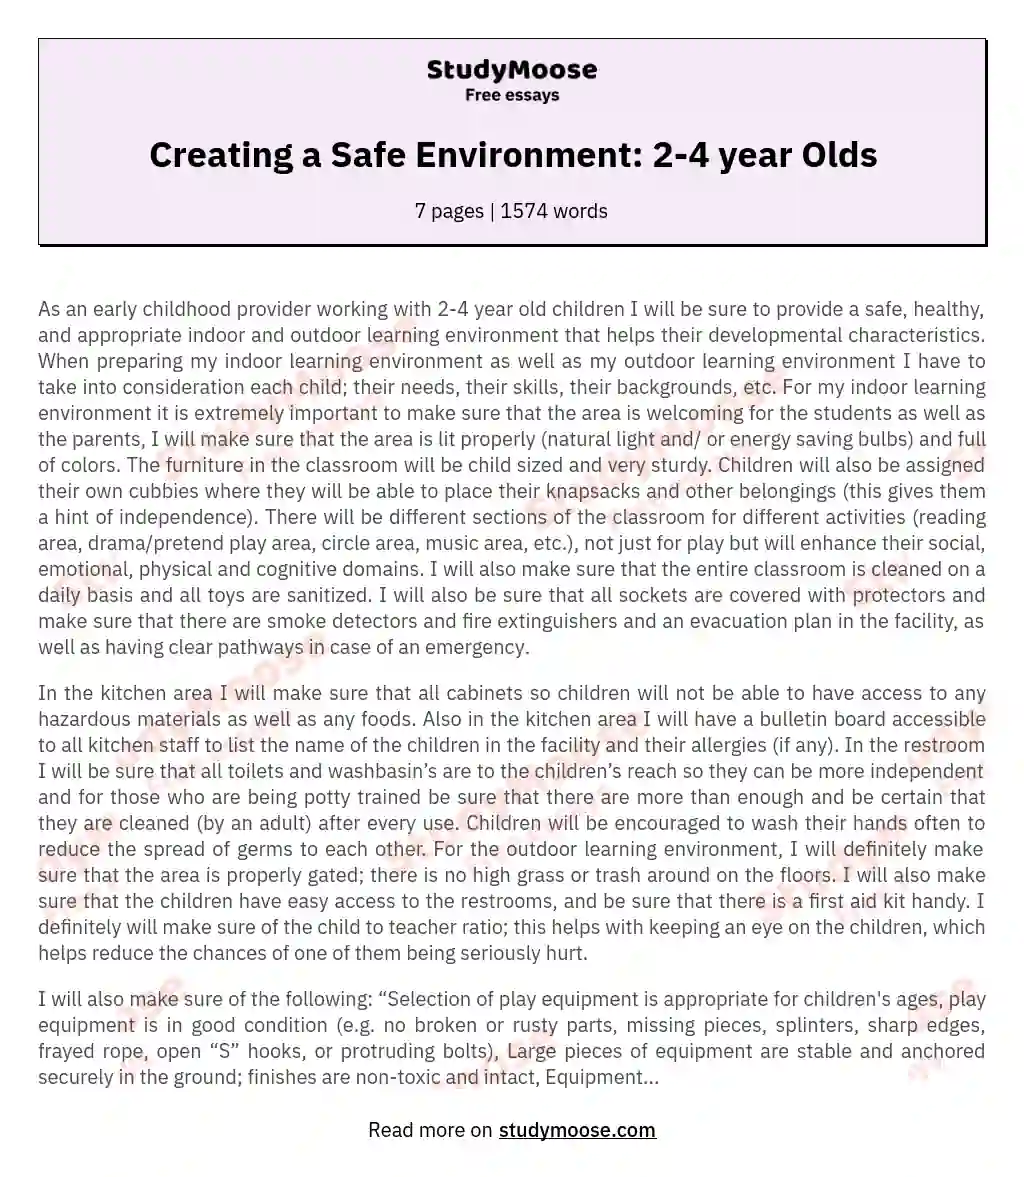 Creating a Safe Environment: 2-4 year Olds essay